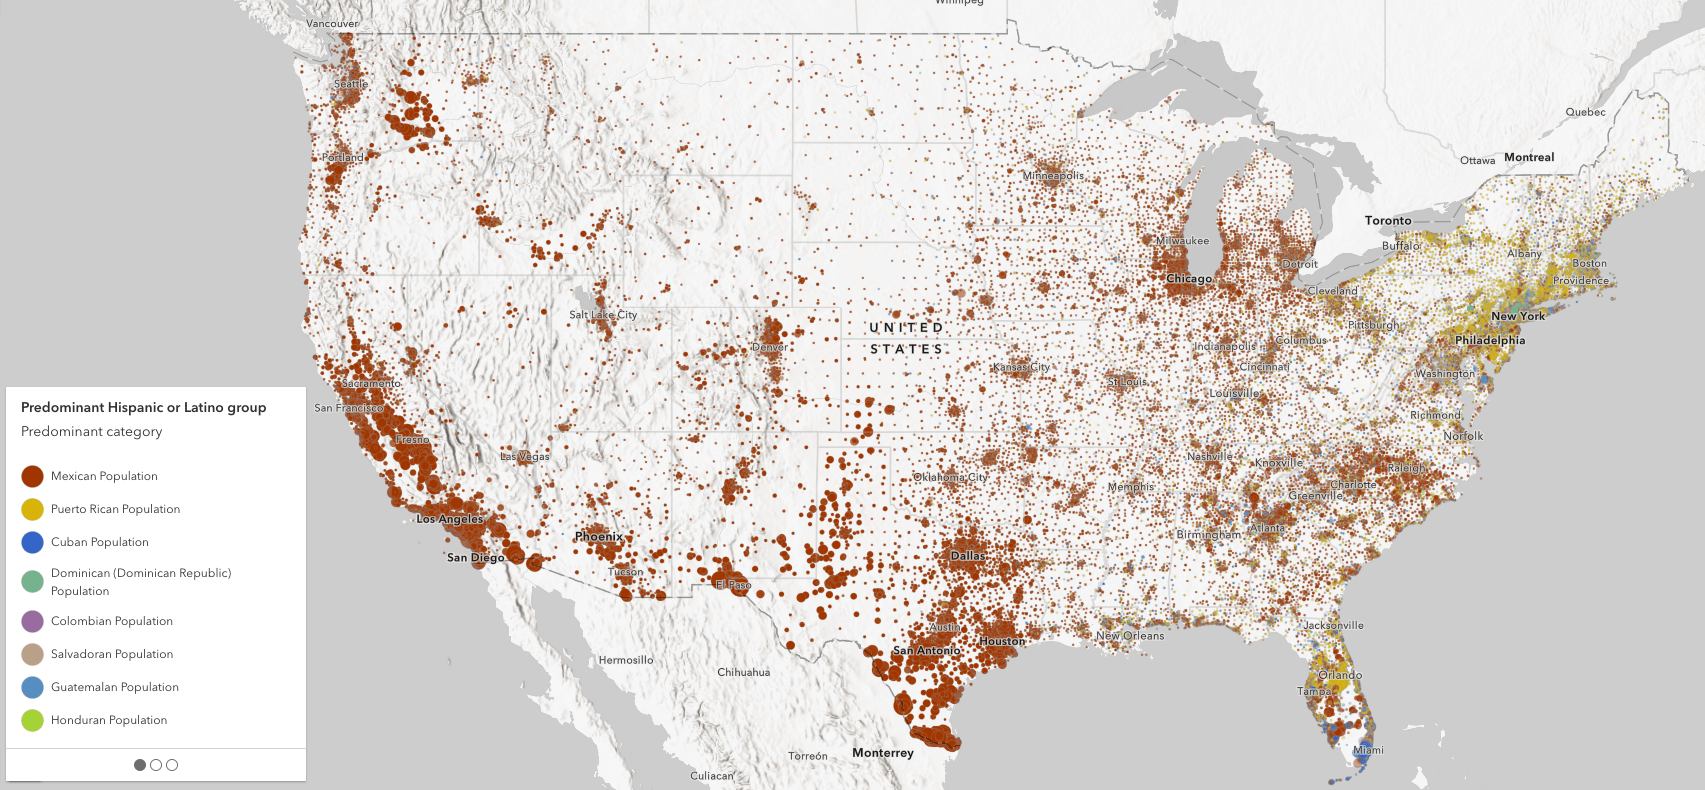 Predominant Hispanic/Latino group by Census Tract in the United States.